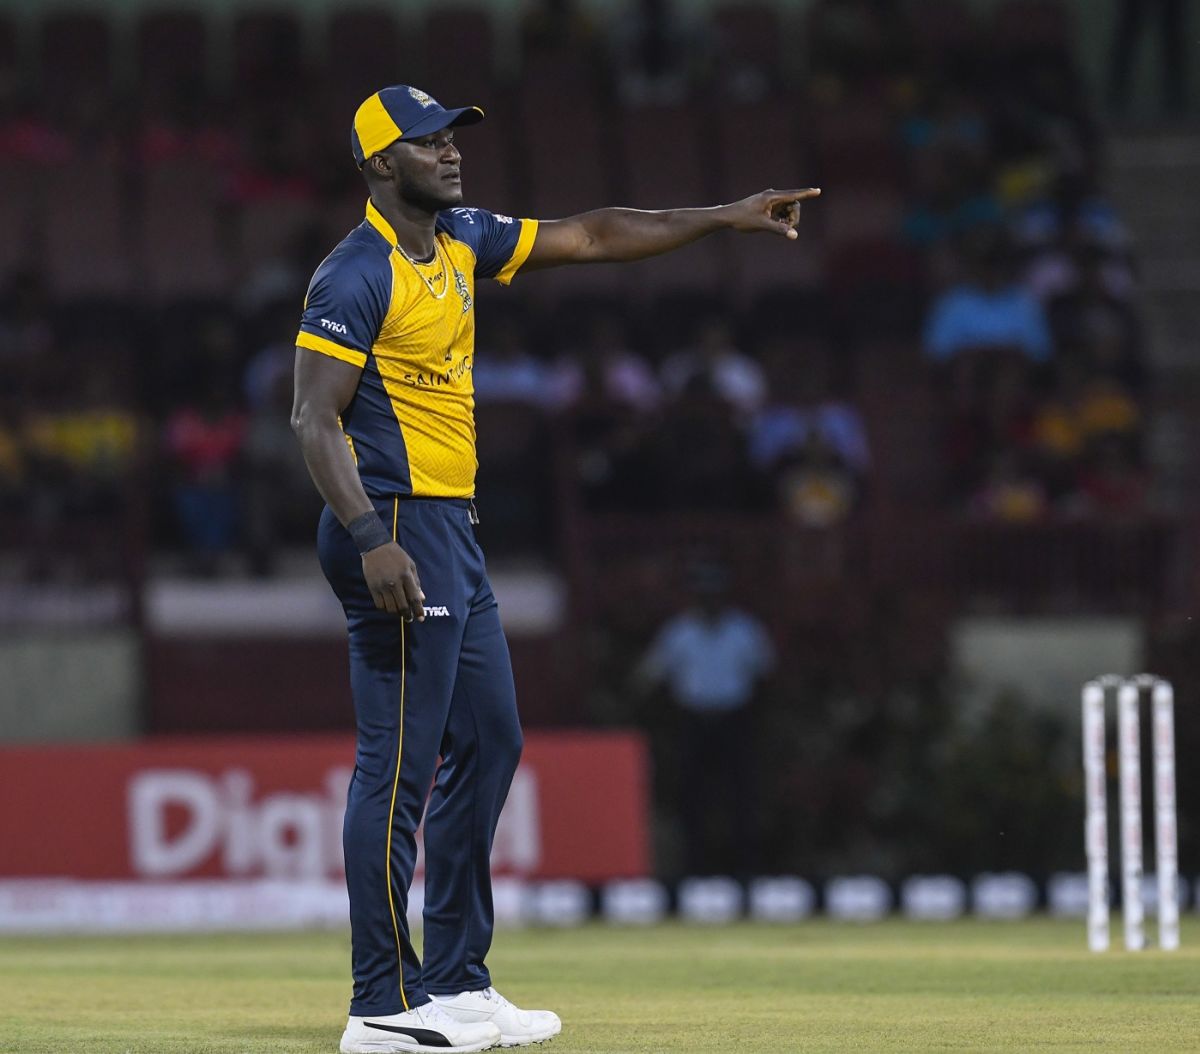 Legends League Cricket: Manipal Tigers announces signing of Darren Sammy, Imran Tahir and Corey Anderson